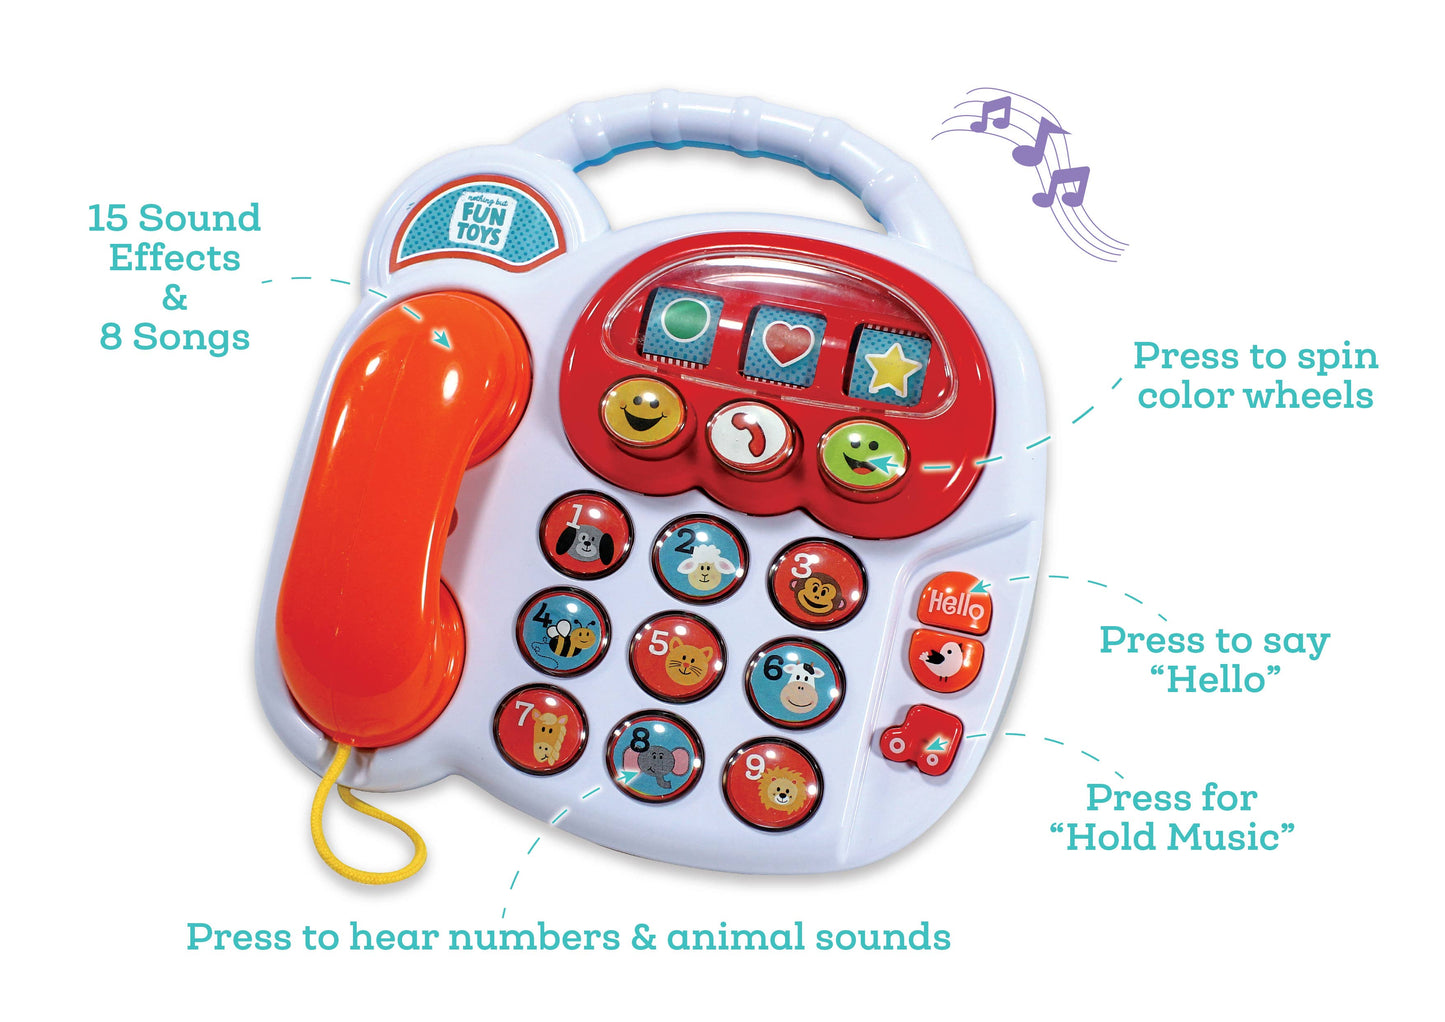 Nothing But Fun Toys - Lights and Sounds Fun Time Telephone